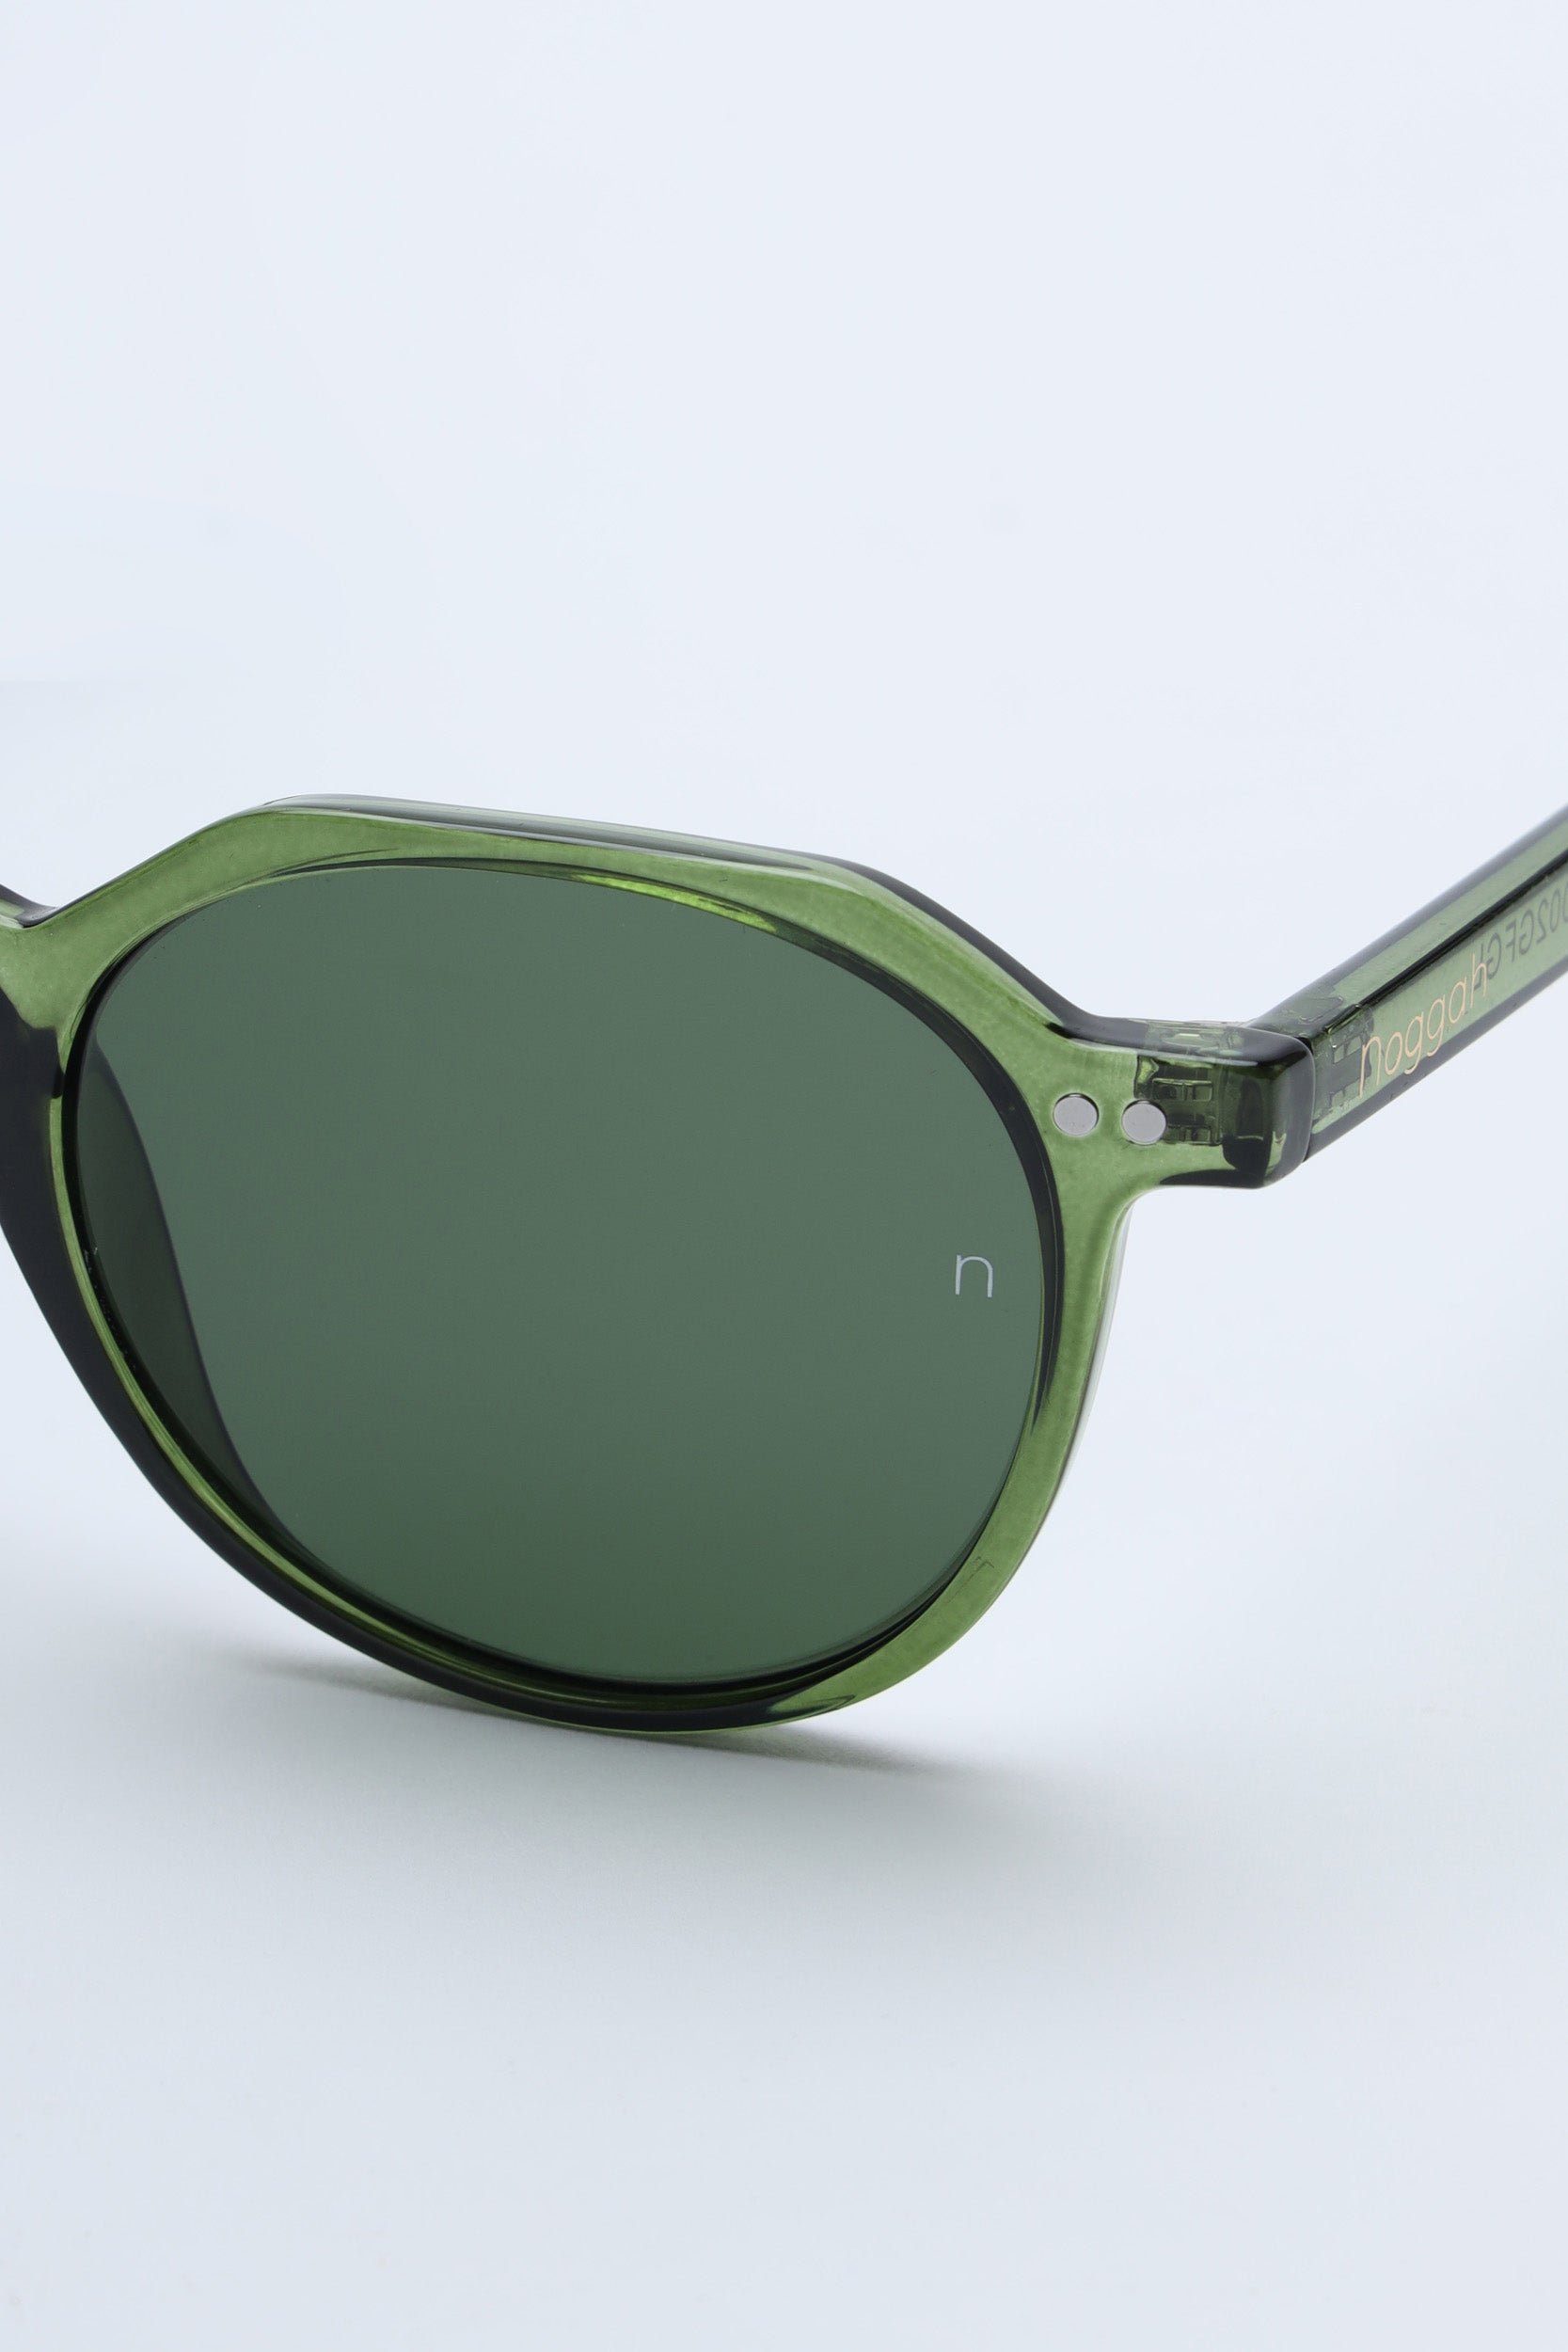 NS1007YFGL PC Brown Frame with Green Glass Lens Sunglasses